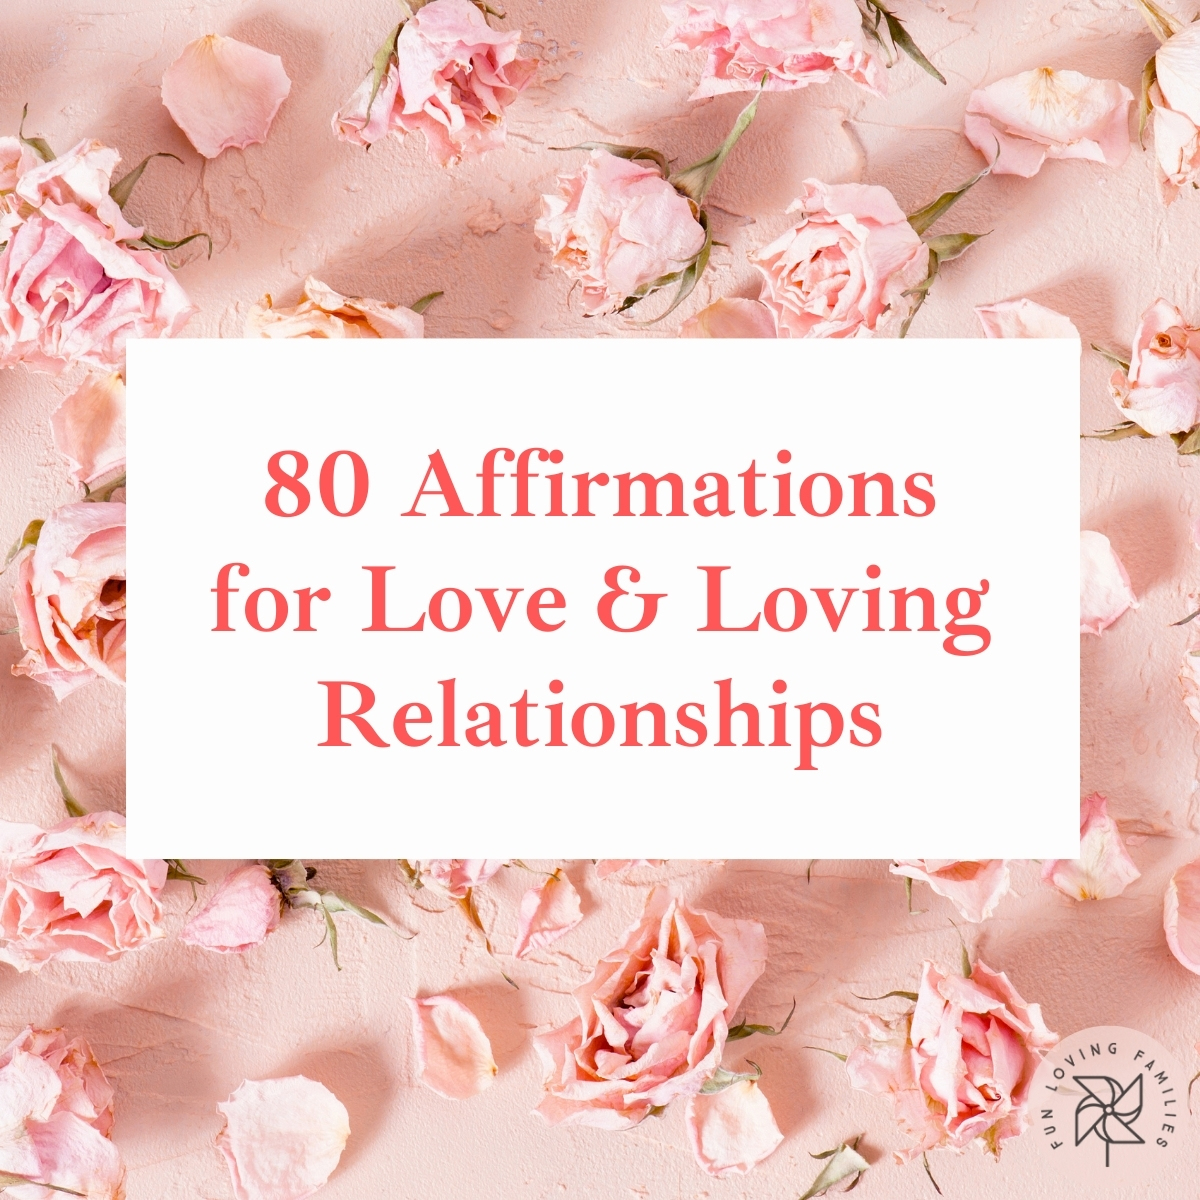 80 Affirmations for Love and Loving Relationships